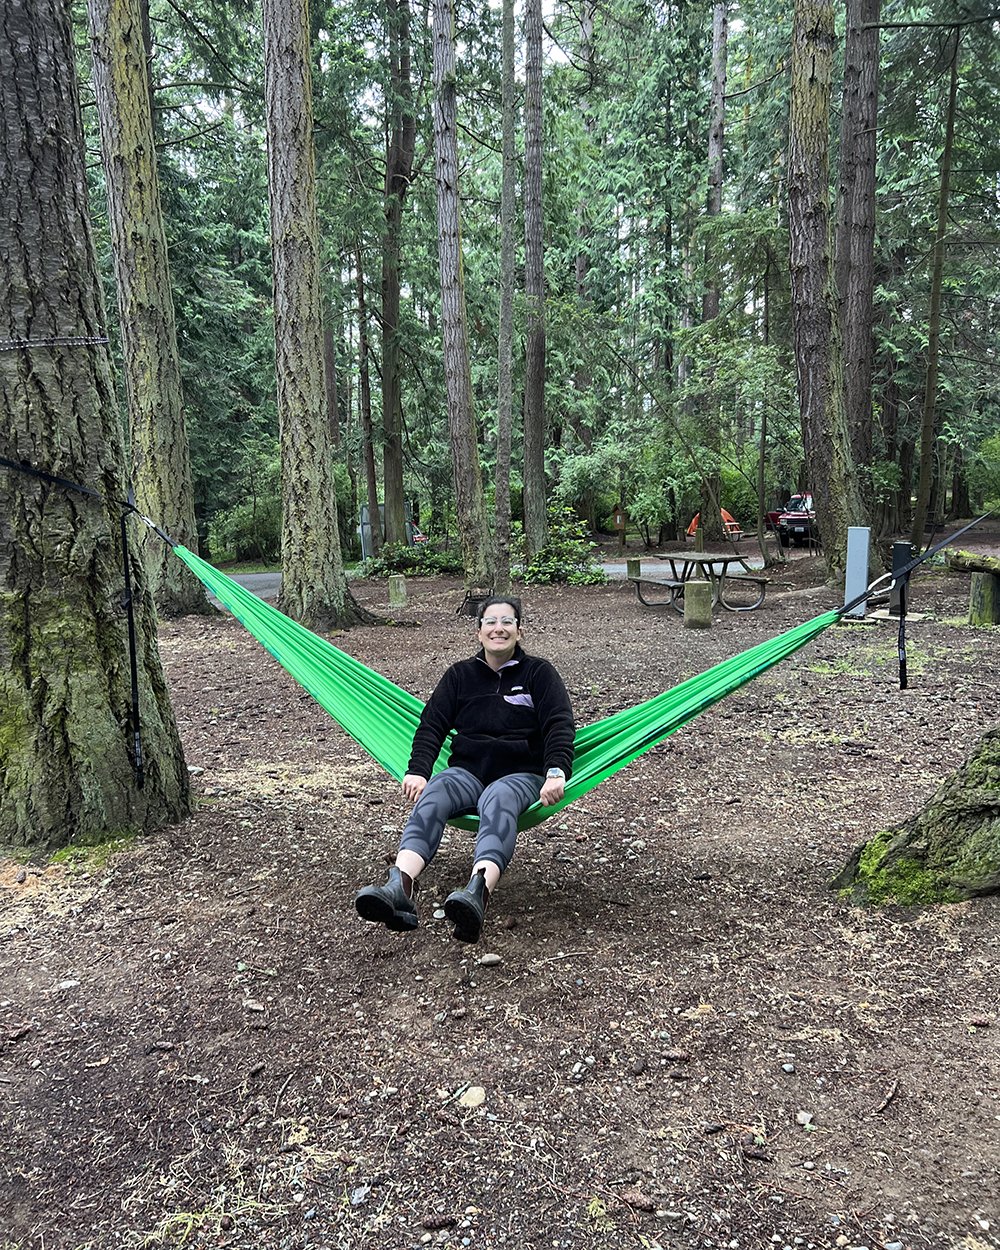  Alexis in another one of her happy places, a hammock in the forest.  